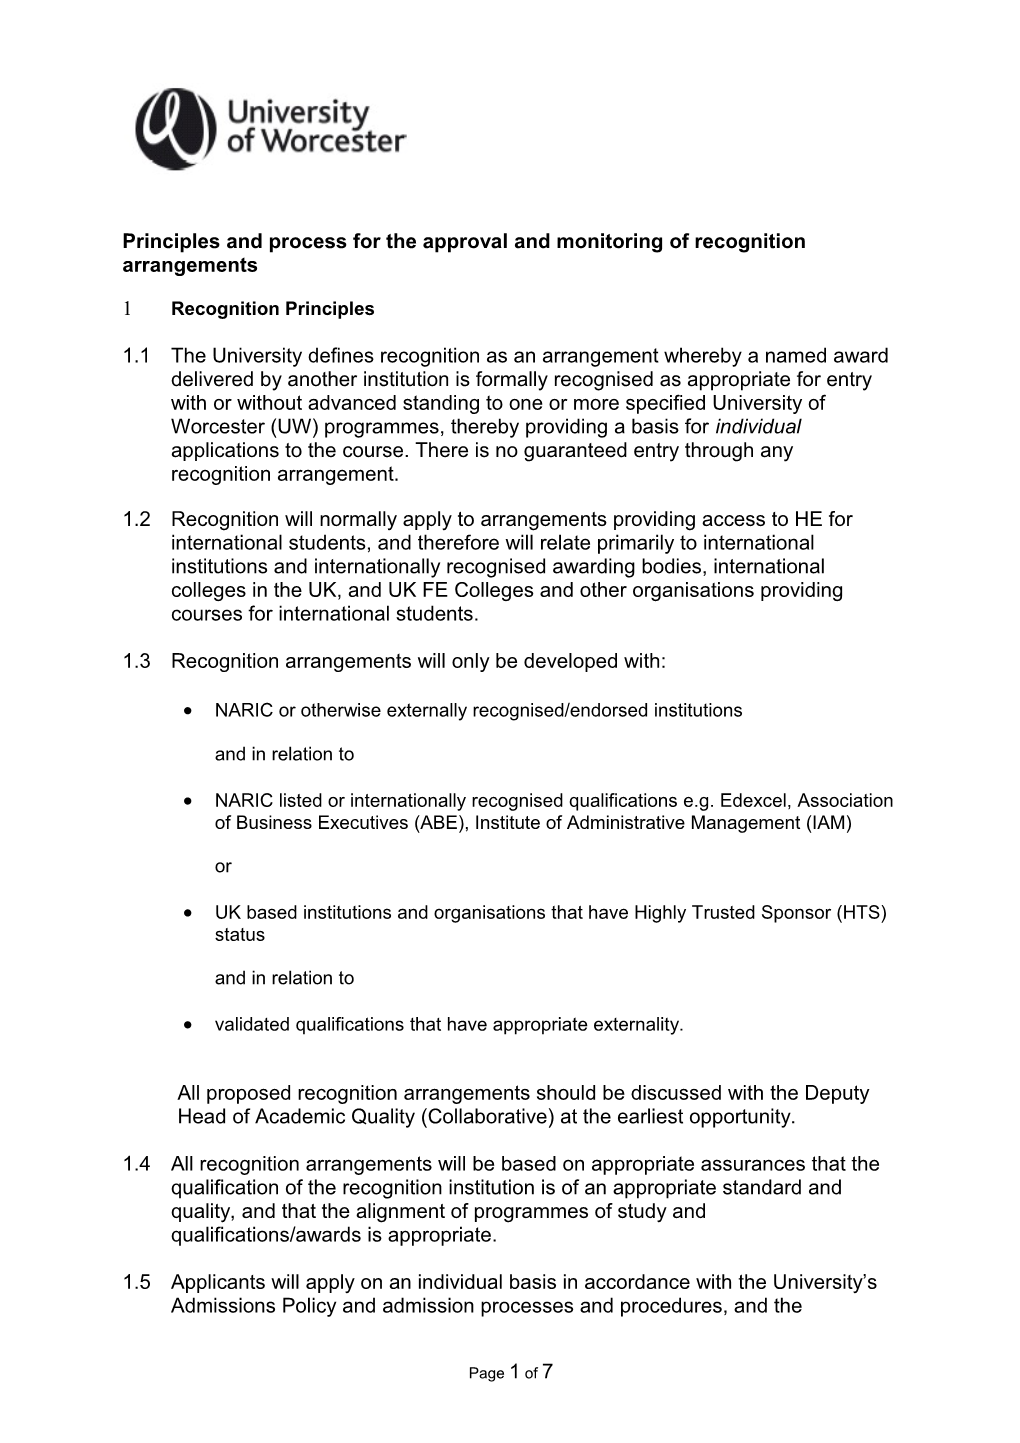 Principles and Process for the Approval and Monitoring of Recognition Arrangements